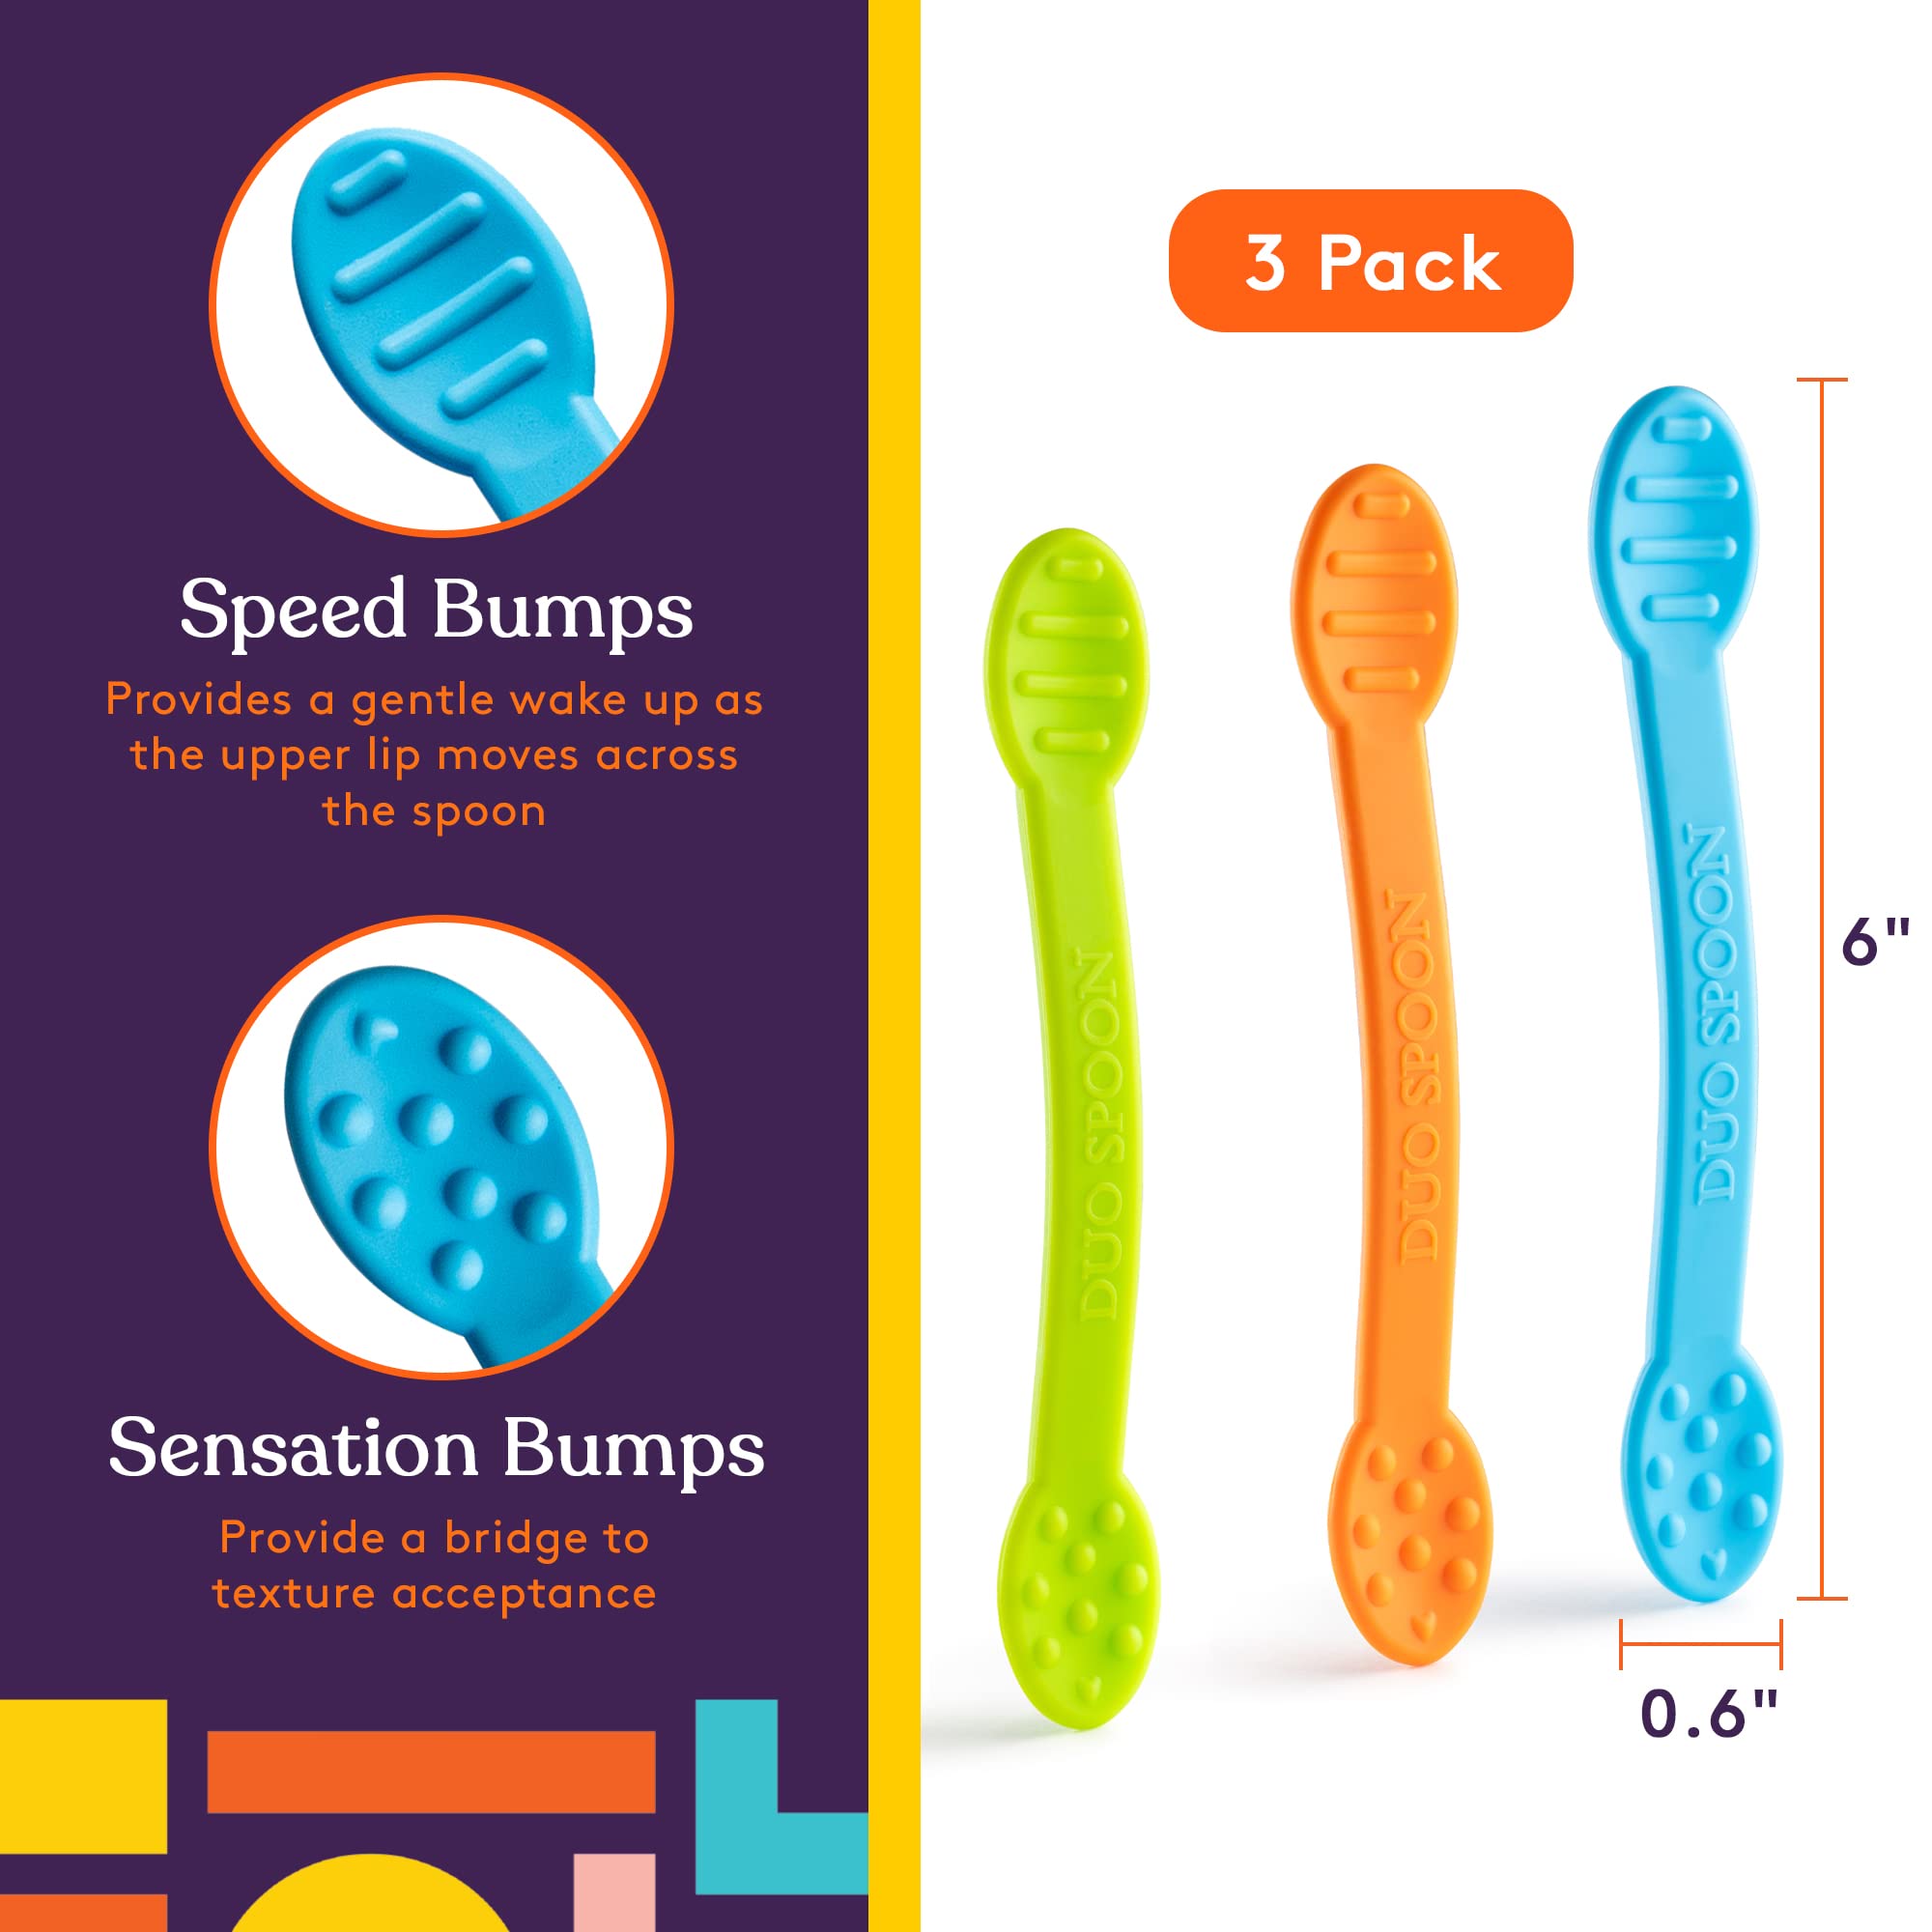 Special Supplies Duo Spoon Oral Motor Therapy Tools, 3 Pack, Textured Stimulation and Sensory Input Treatment for Babies, Toddlers or Kids, BPA Free Silicone with Flexible, Easy Handle